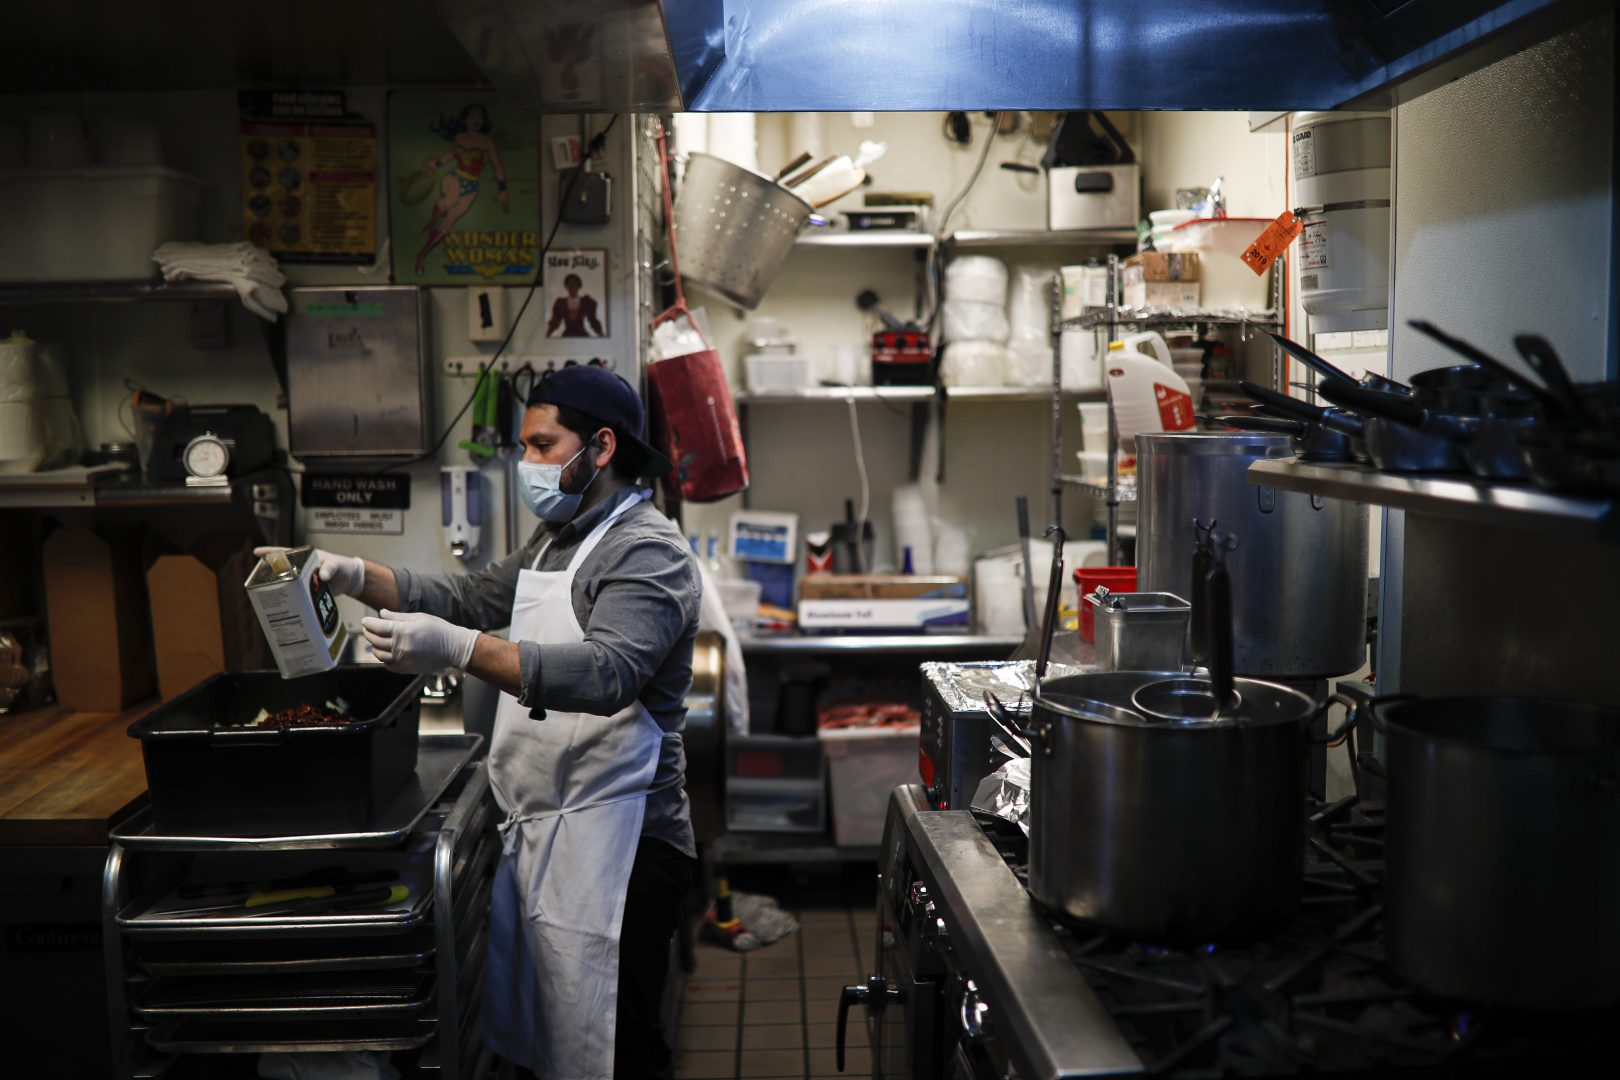 Kitchen worker Misael Cruz, 38, wears a surgical mask and gloves as he prepares food at Little Tong Noodle Shop that is providing meals on a voluntary donation basis for take-out only as authorities restricted gatherings and barred sit-down dining due to coronavirus concerns, Tuesday, March 24, 2020, in New York.